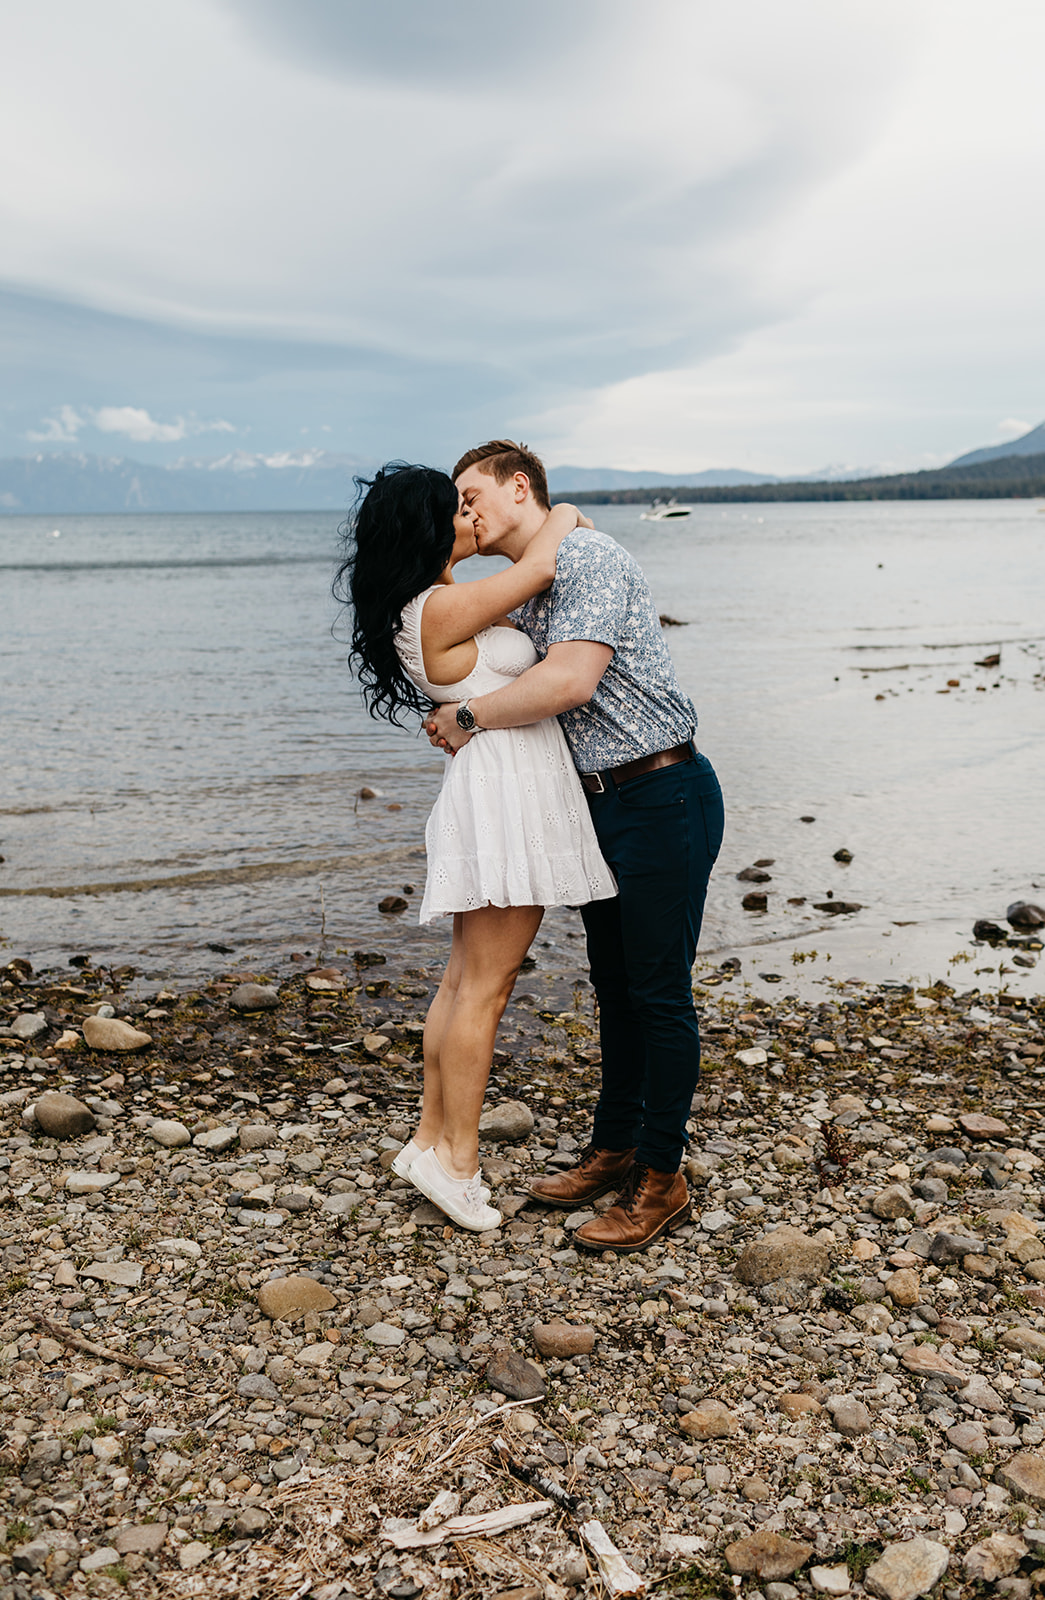 A couple goes for a dip kiss while on the rocky shore of west lake tahoe